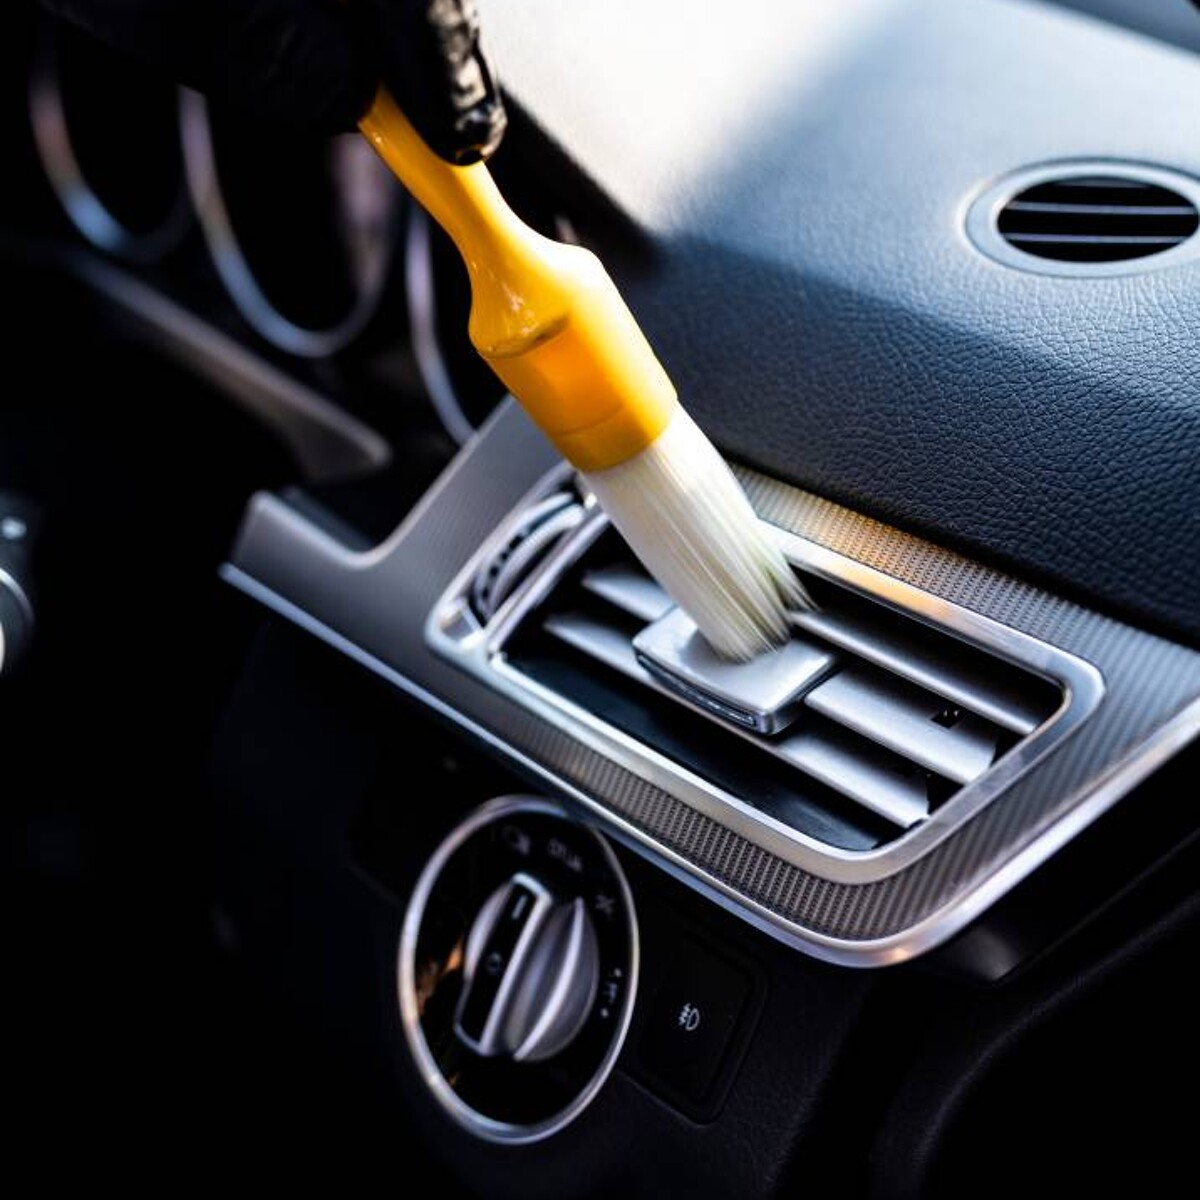 Car Detailing Costs: The Cost to Have Your Car's Interior Cleaned